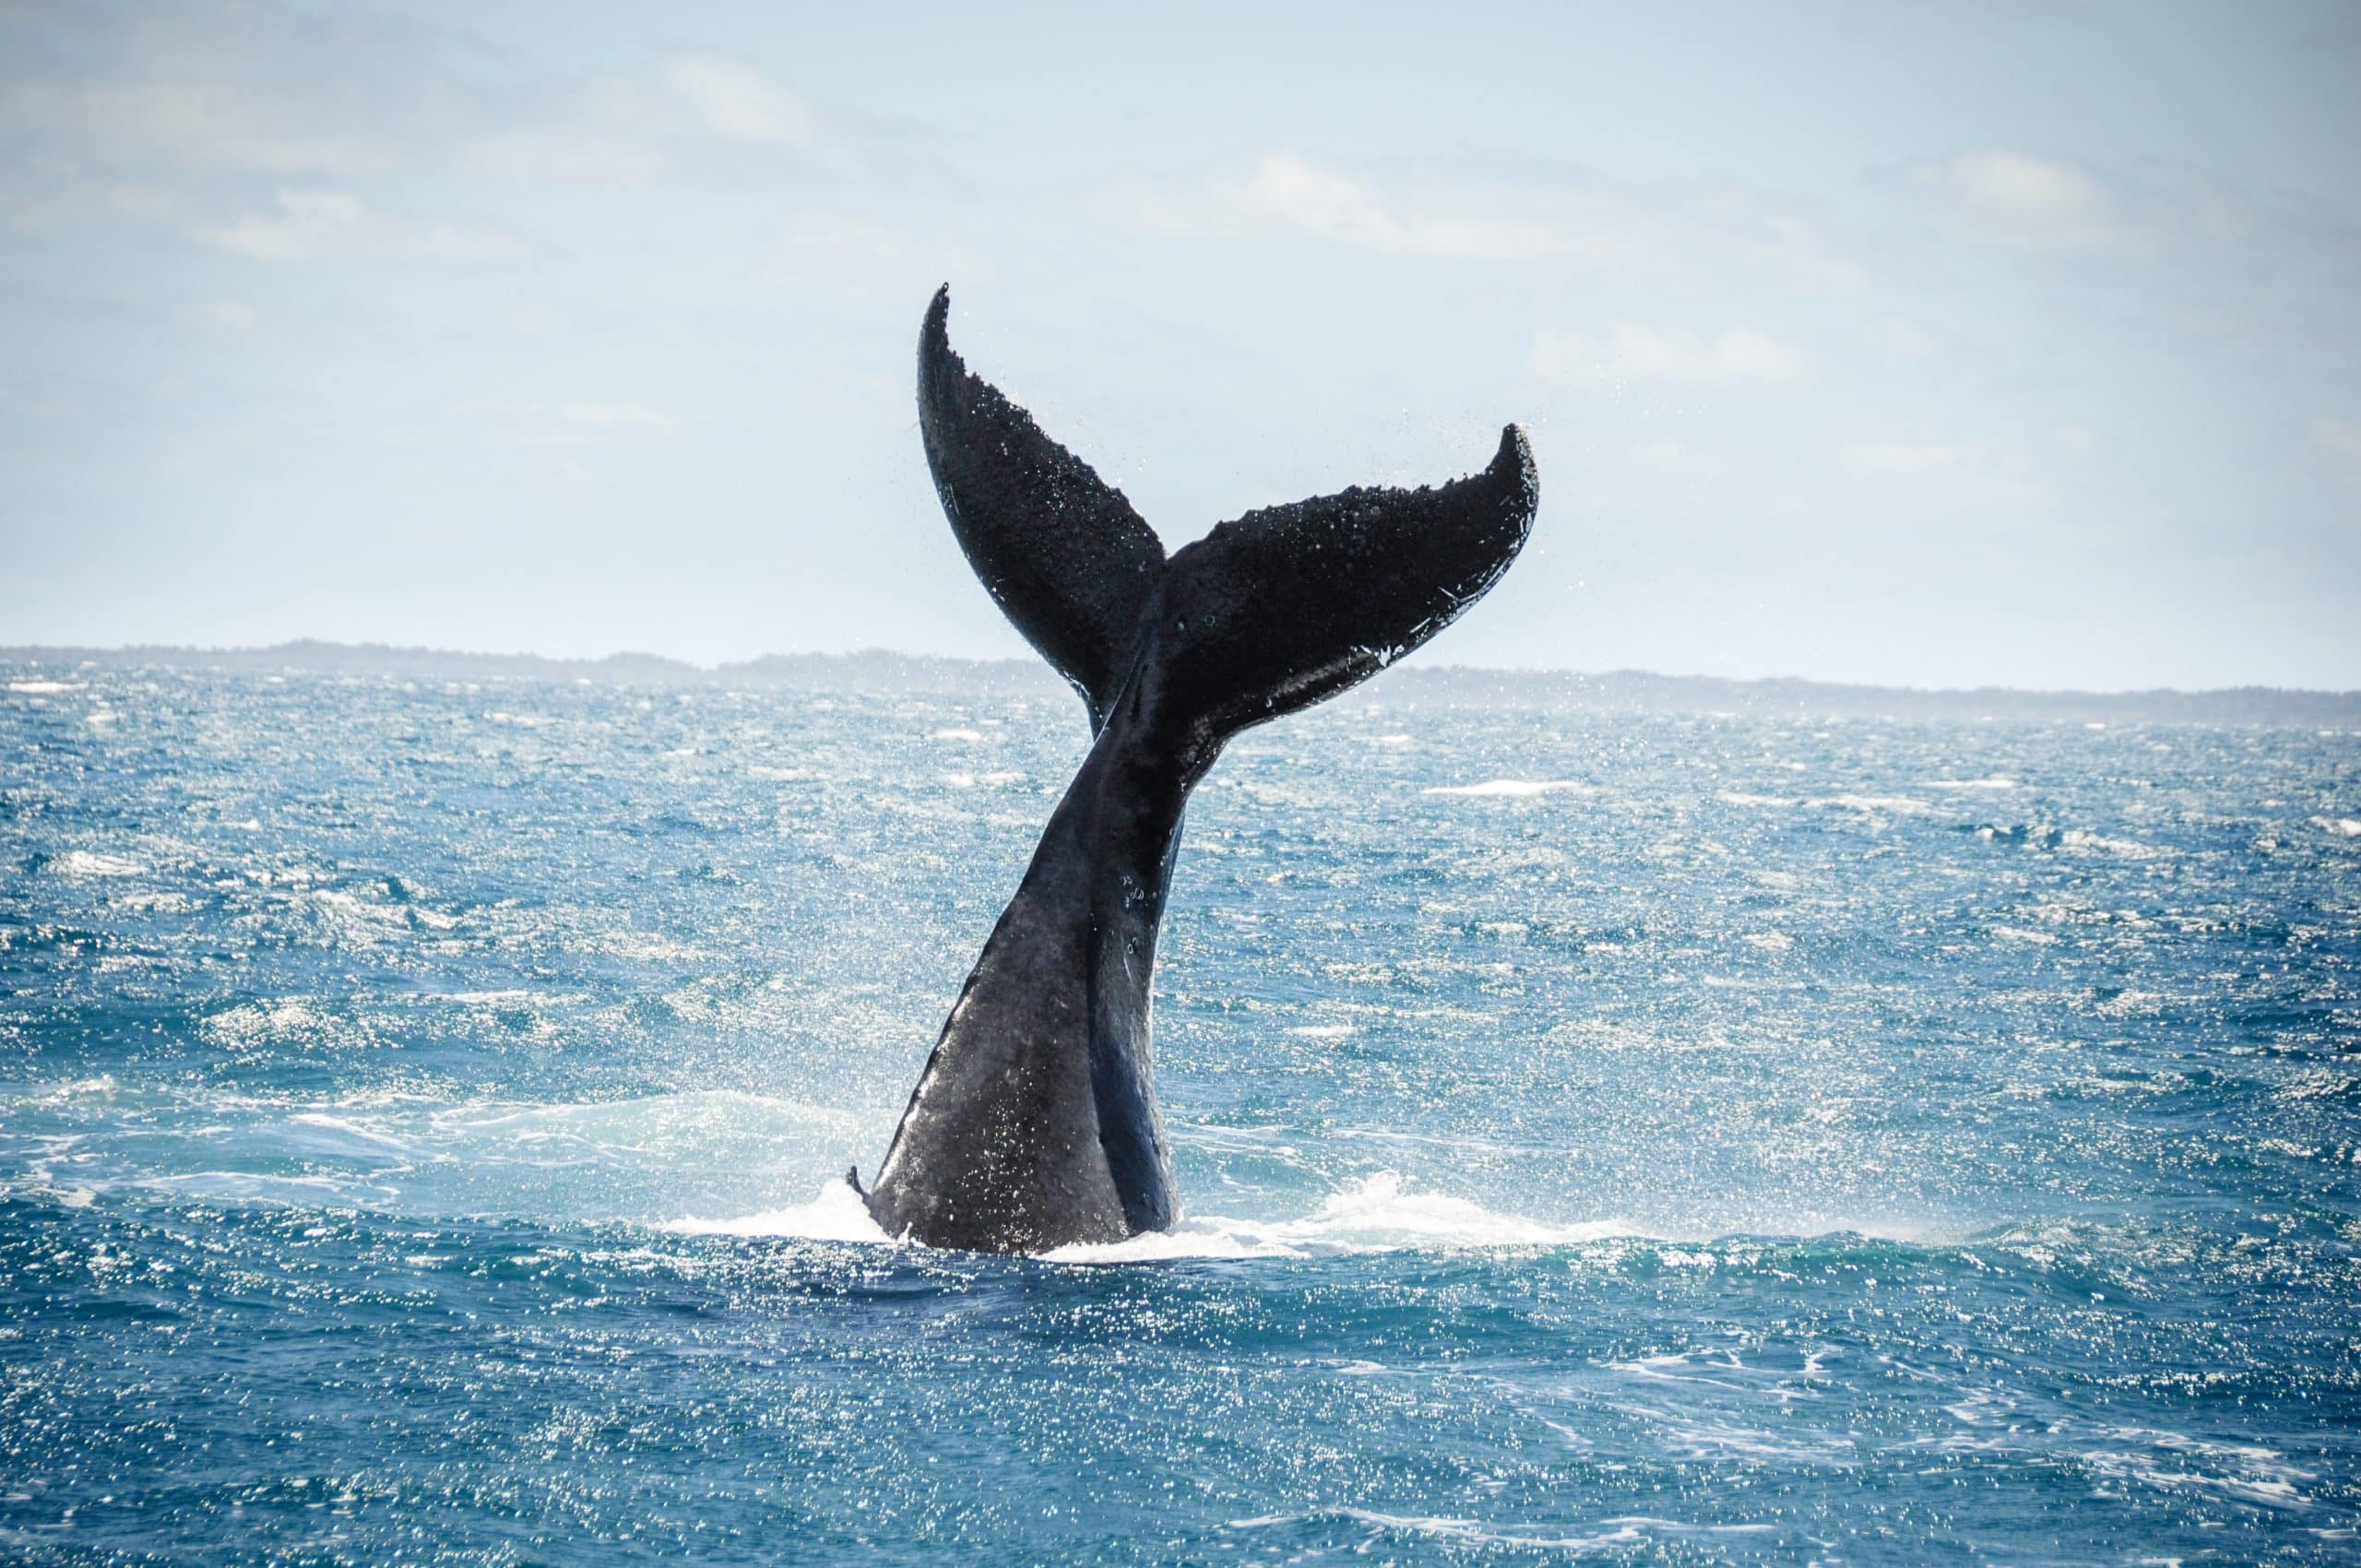 Australian,Humpback,Mother,Teaches,Baby,Whale,To,Jump,Out,Of